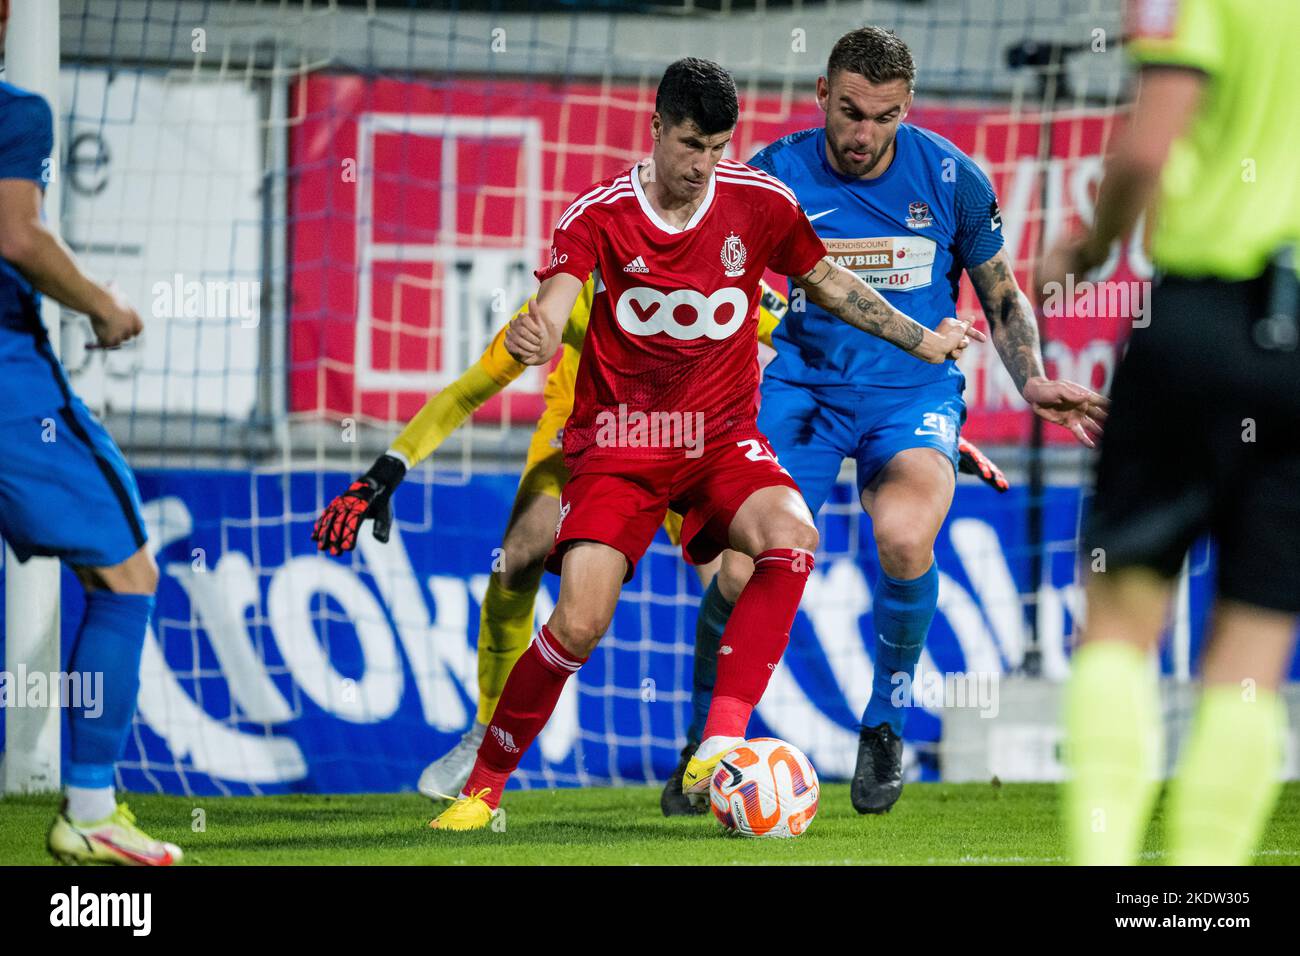 Dender's Georges Gabriel Brent, Dender's Kobe Cools and Standard's Stipe Perica fight for the ball during a Croky Cup 1/16 final game between Dender EH and Standard de Liege, in Denderleeuw, Tuesday 08 November 2022. BELGA PHOTO JASPER JACOBS Stock Photo